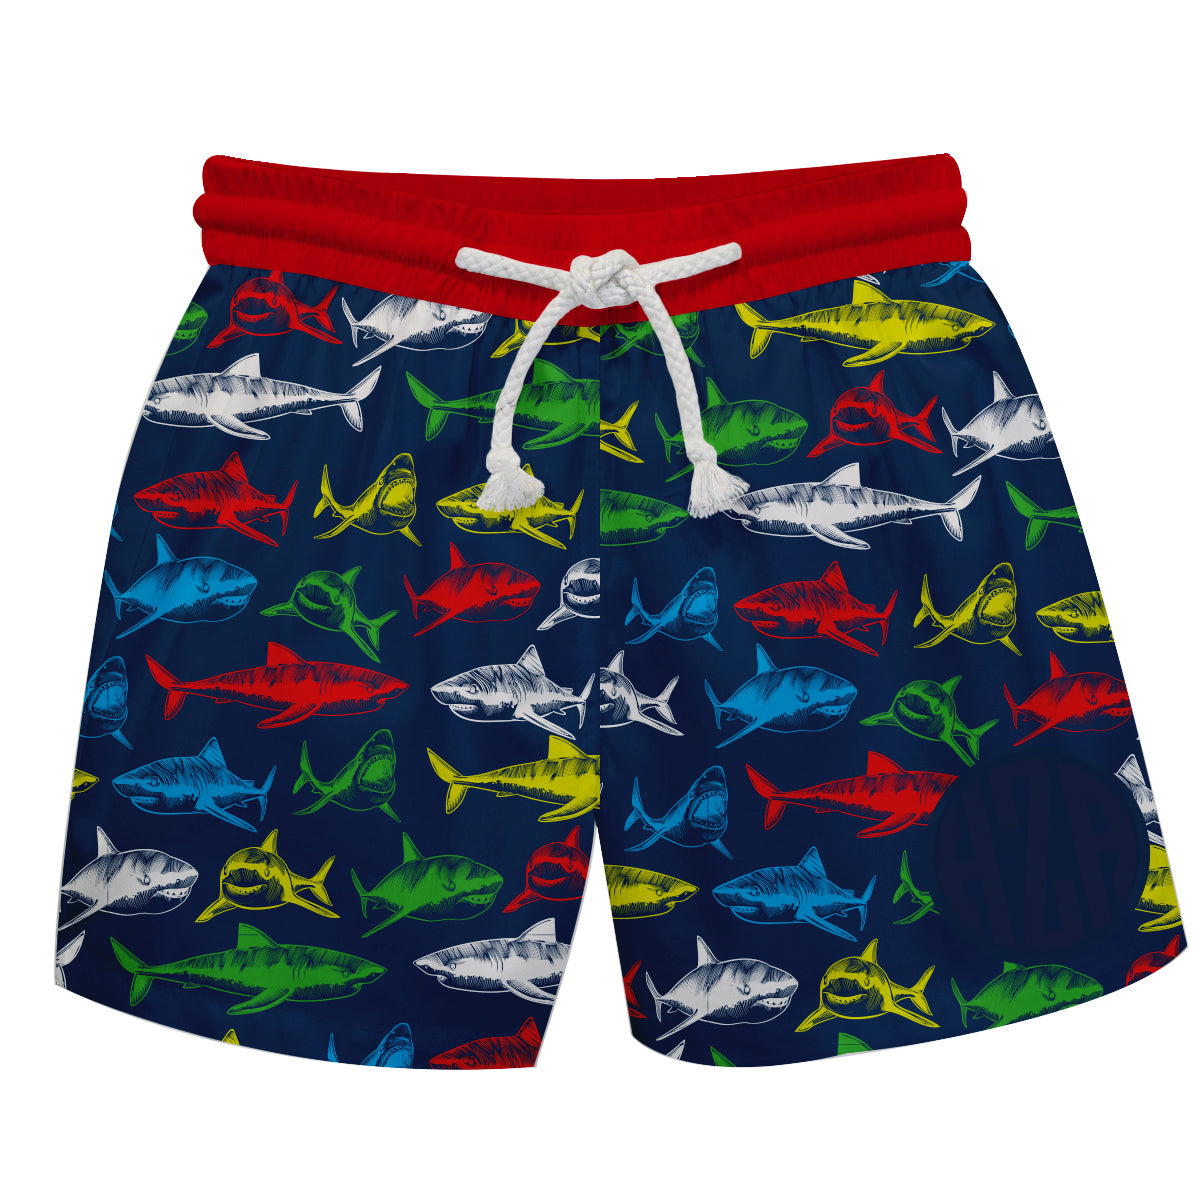 Sharks Print Monogram Navy and Red Swimtrunk - Wimziy&Co.